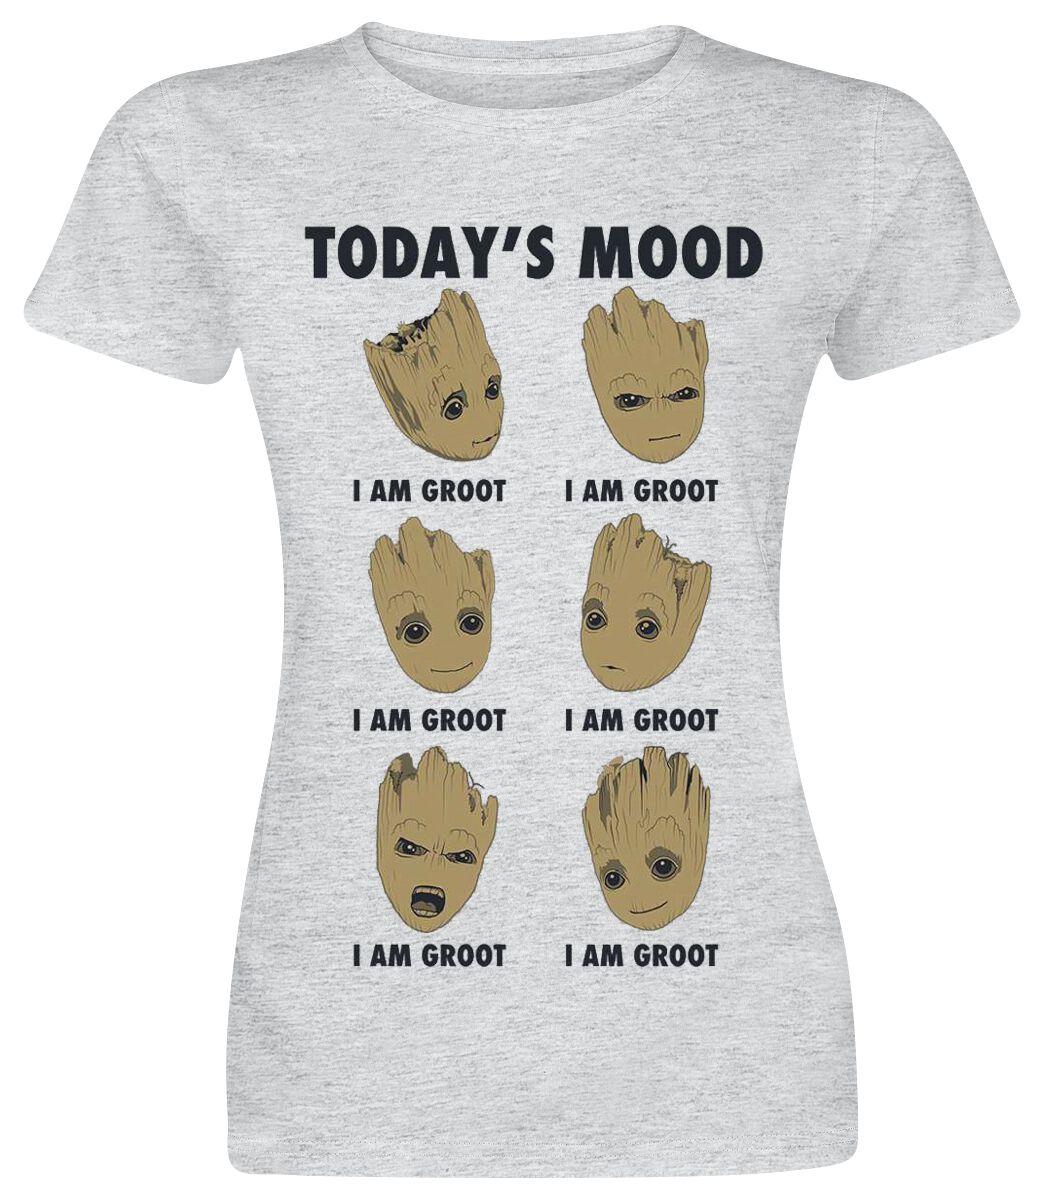 Guardians Of The Galaxy 2 - Groot Today's Mood T-Shirt mottled light grey